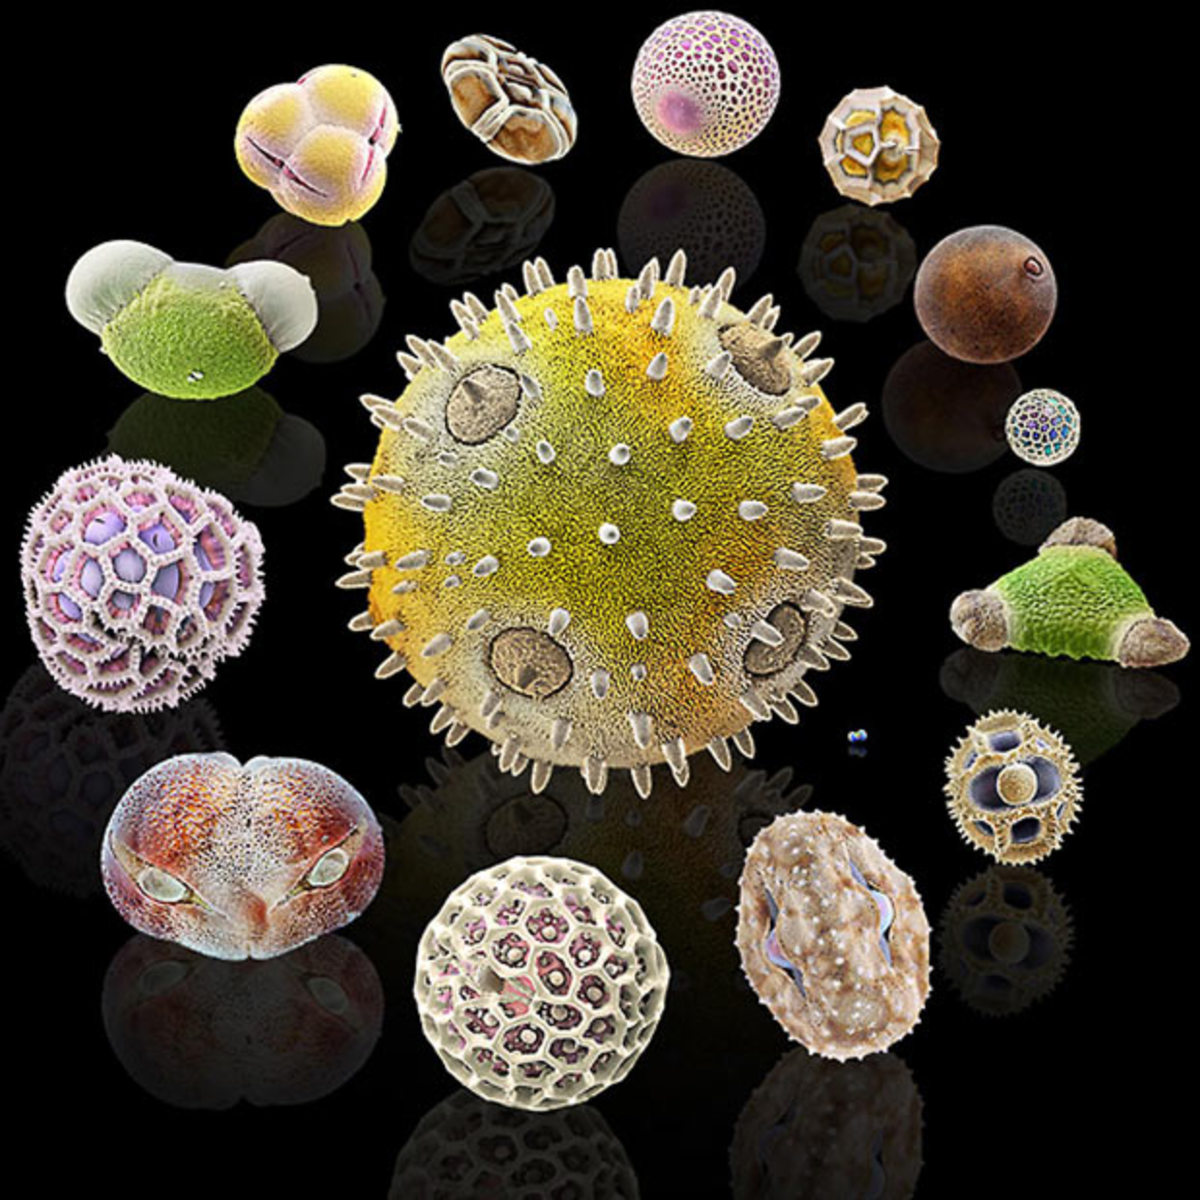 Different sizes and colors of pollen